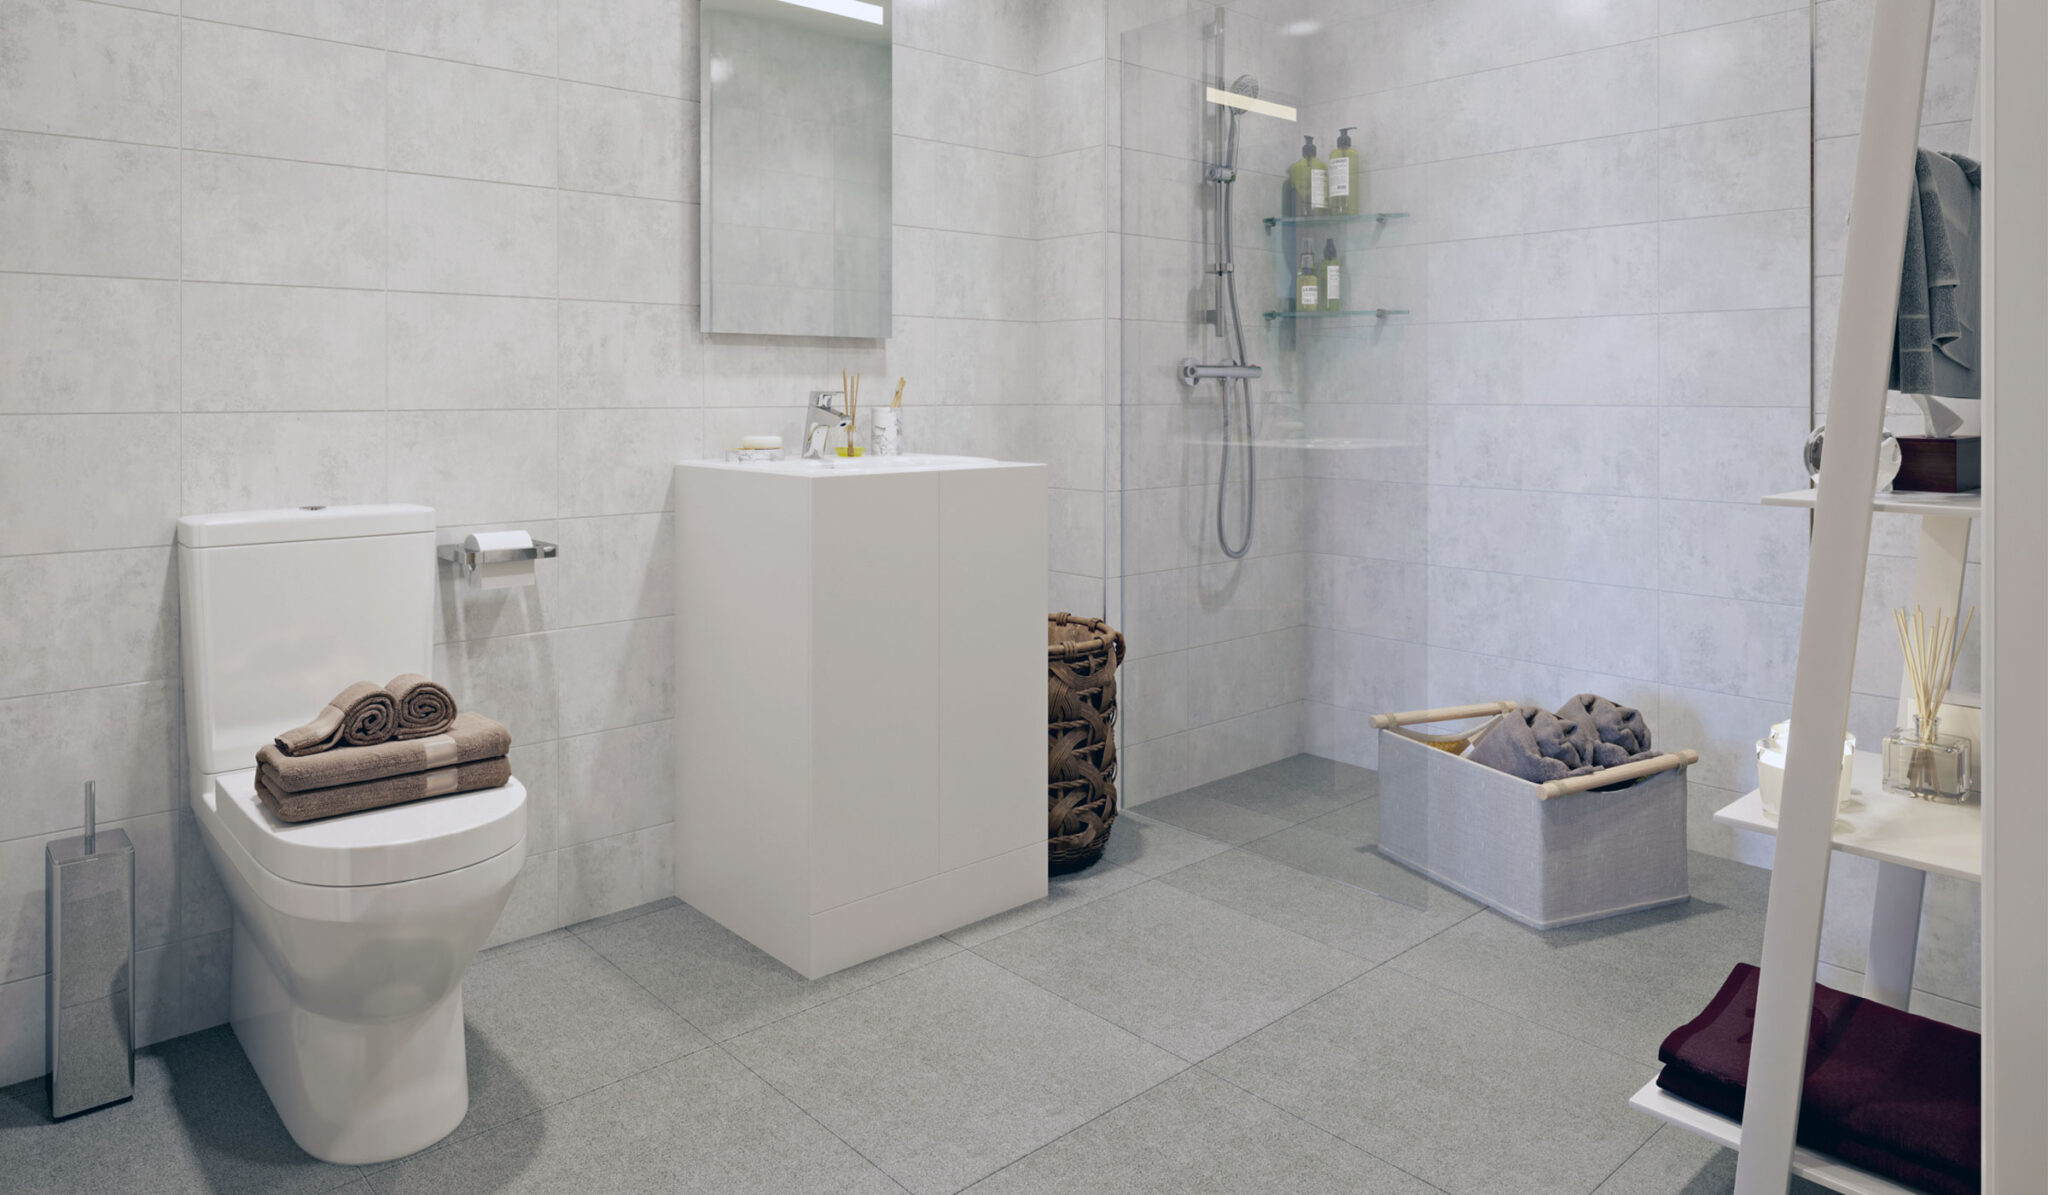 Bathrooms with wall to wall tiling and modern fixtures and fittings